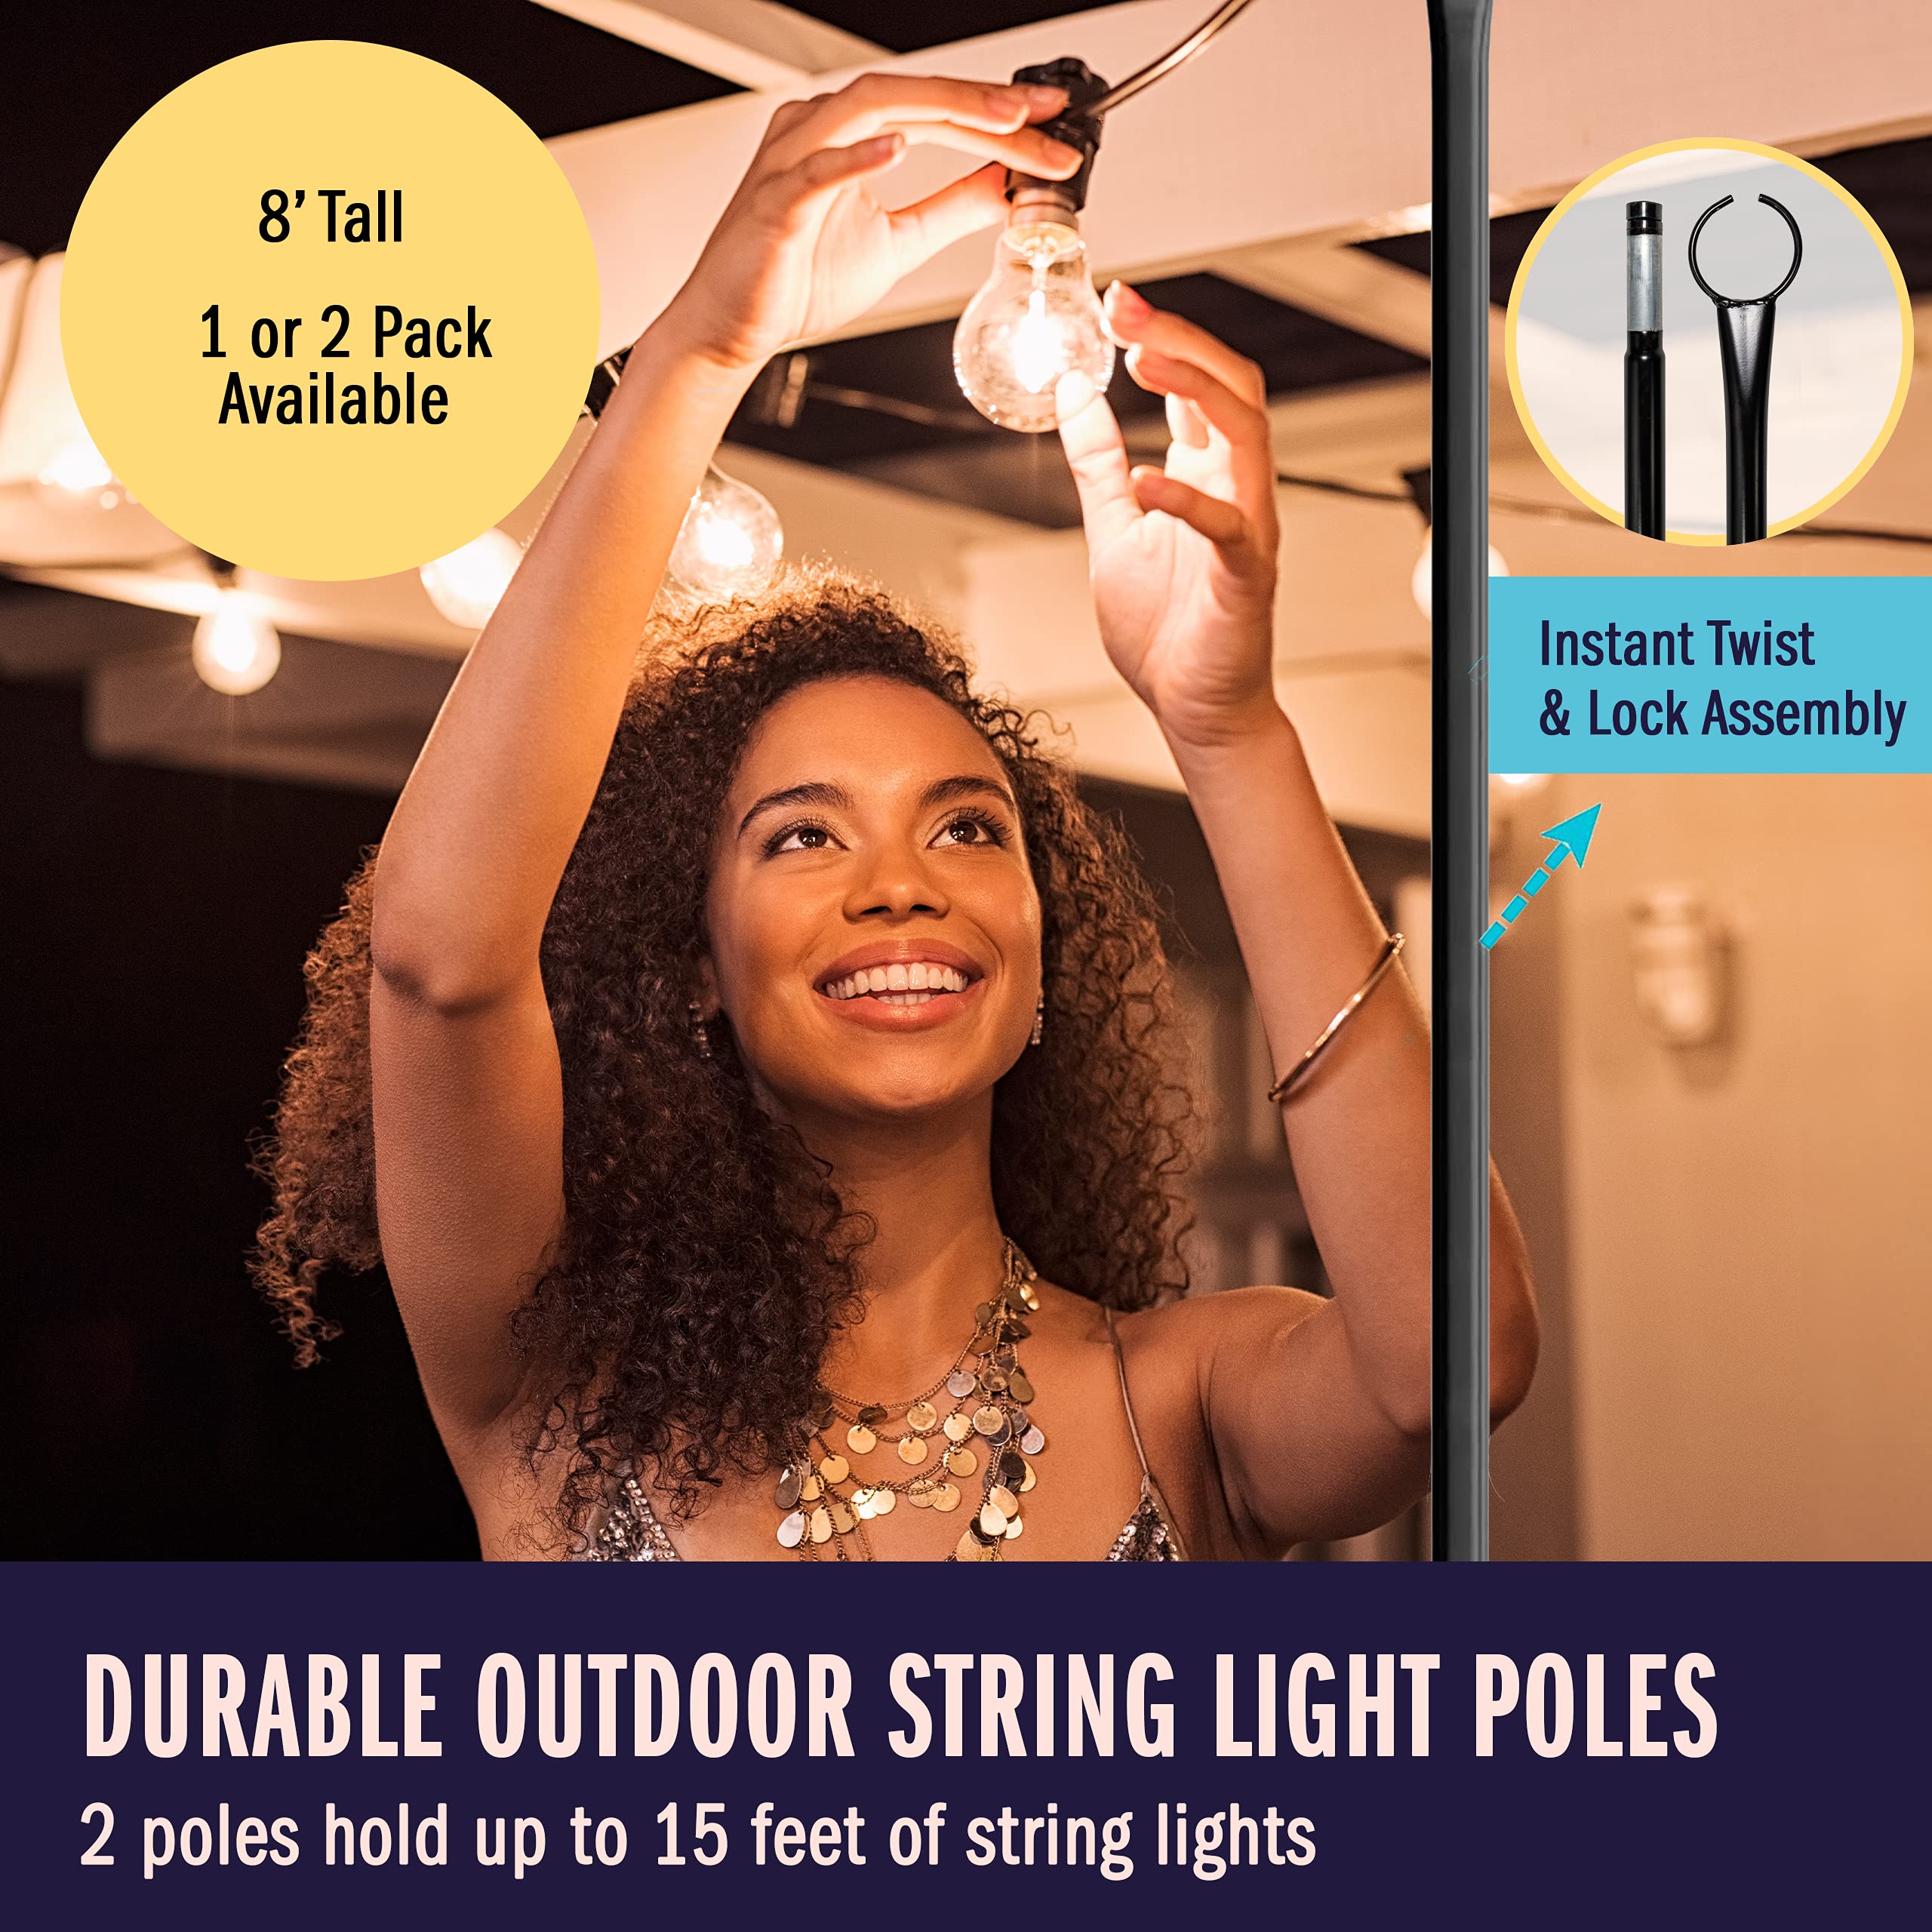 Holiday Styling String Light Poles for Outdoor String Lights - 2-Pack Christmas Light Pole w/Hooks to Hang LED Lighting - Metal, Outside Patio Stand and Hanger Tool for Backyard, Bistro & Weddings